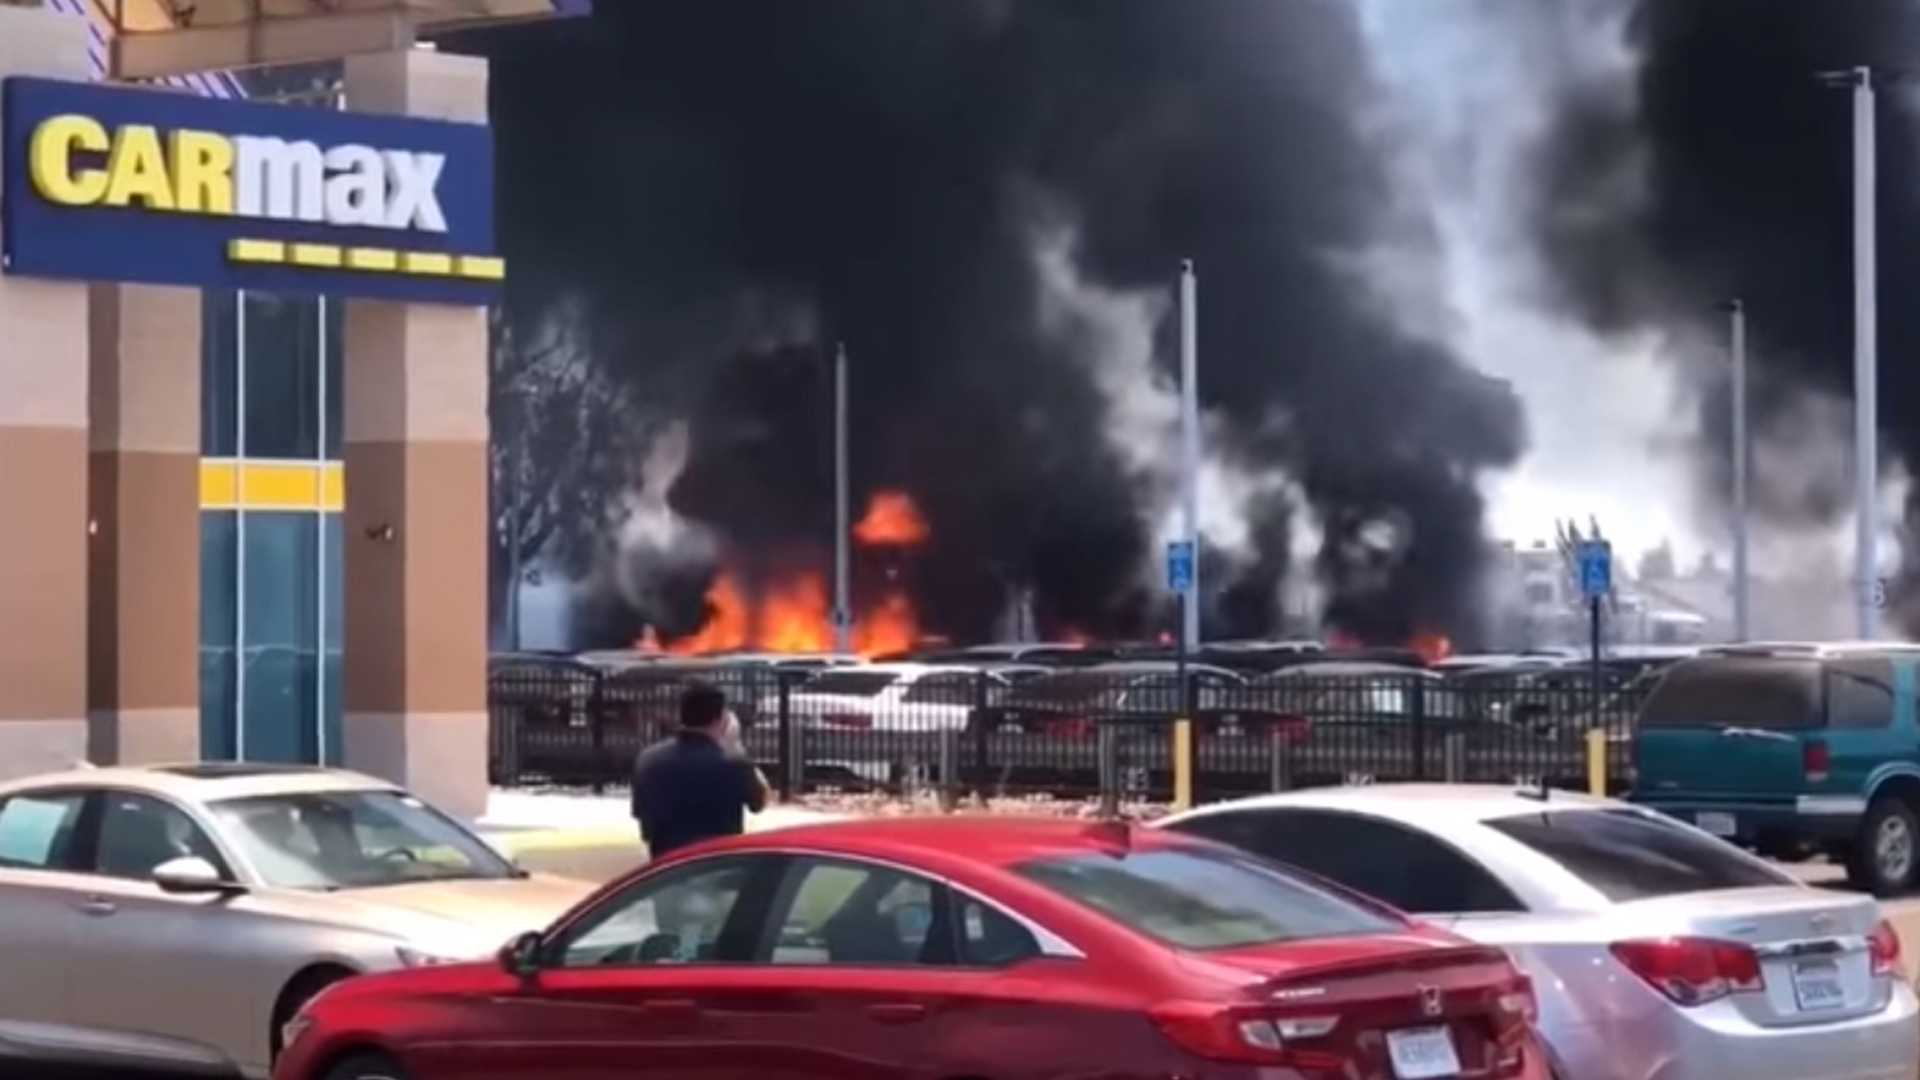 Semi Allegedly Sparks Fire Burns Cars At Carmax Dealership